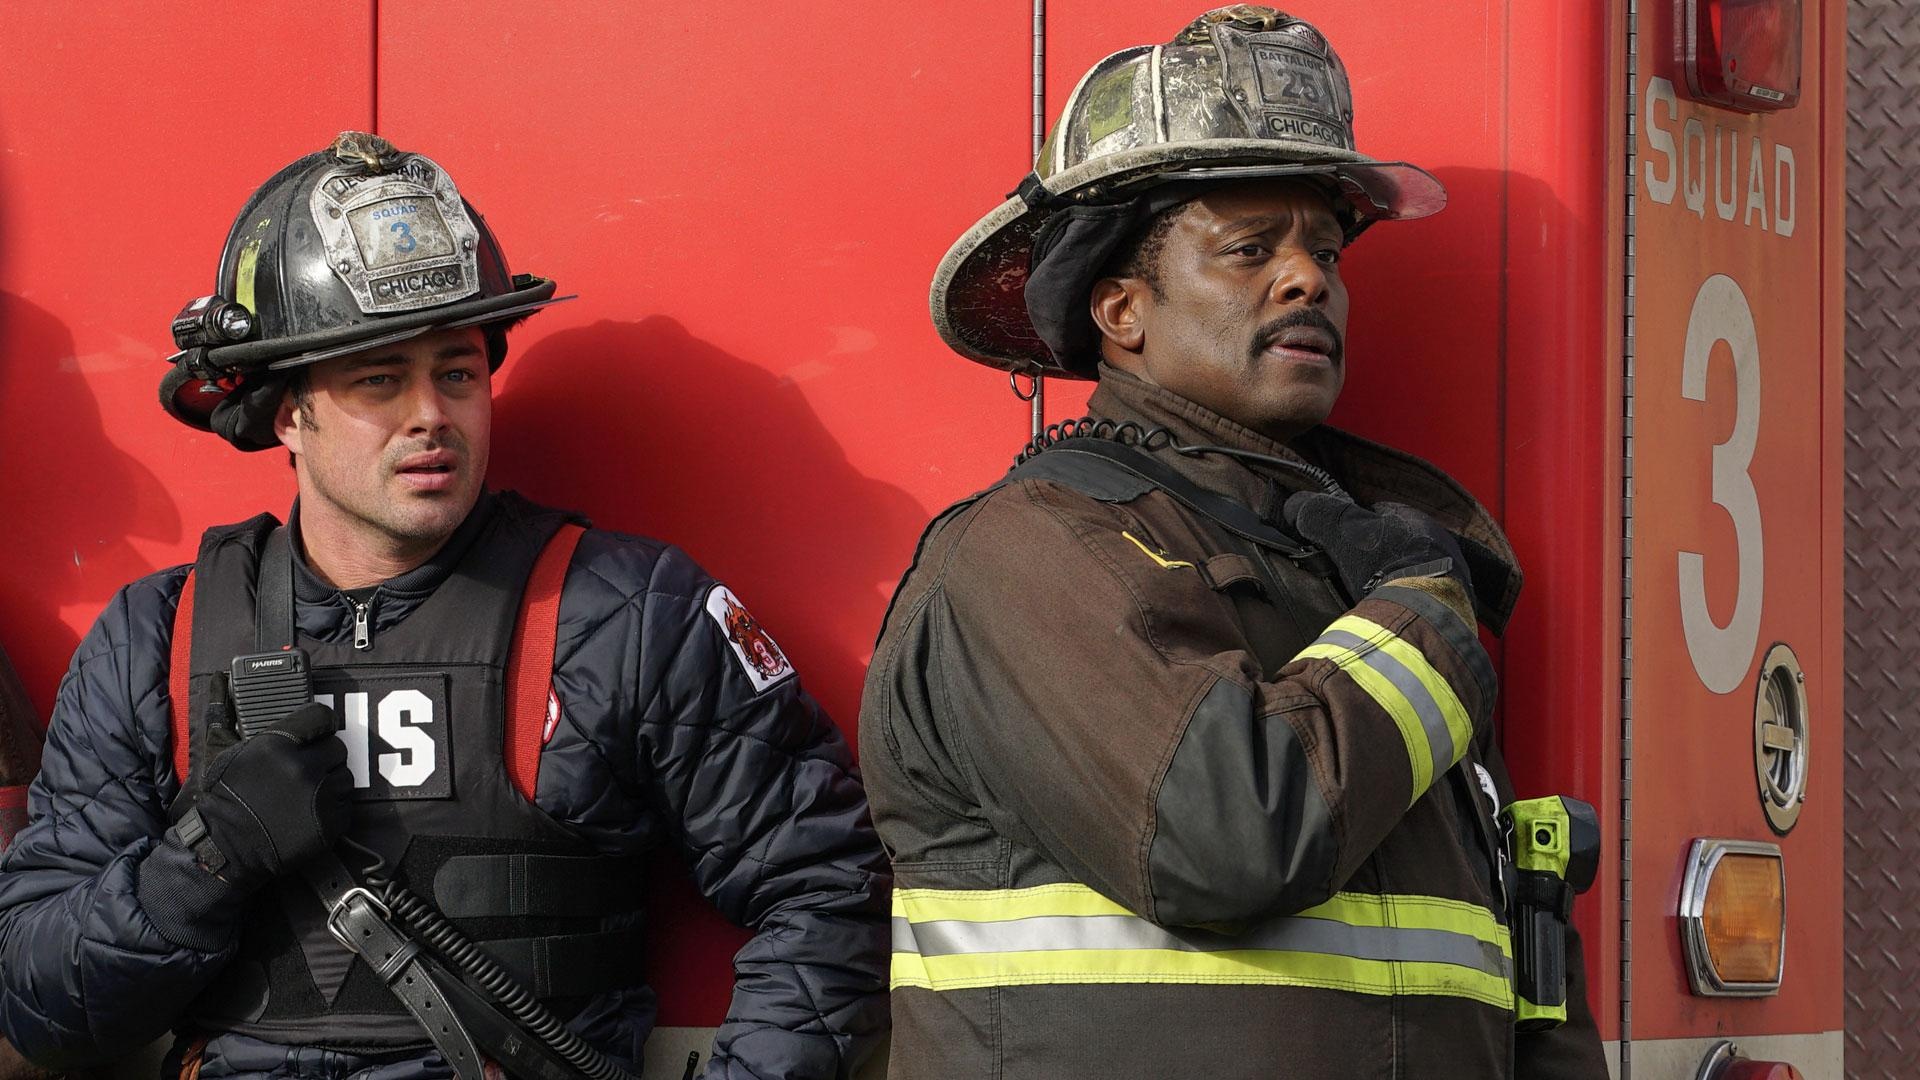 Chicago Fire cast, Firefighter characters, Dramatic storyline, Heroism on screen, 1920x1080 Full HD Desktop